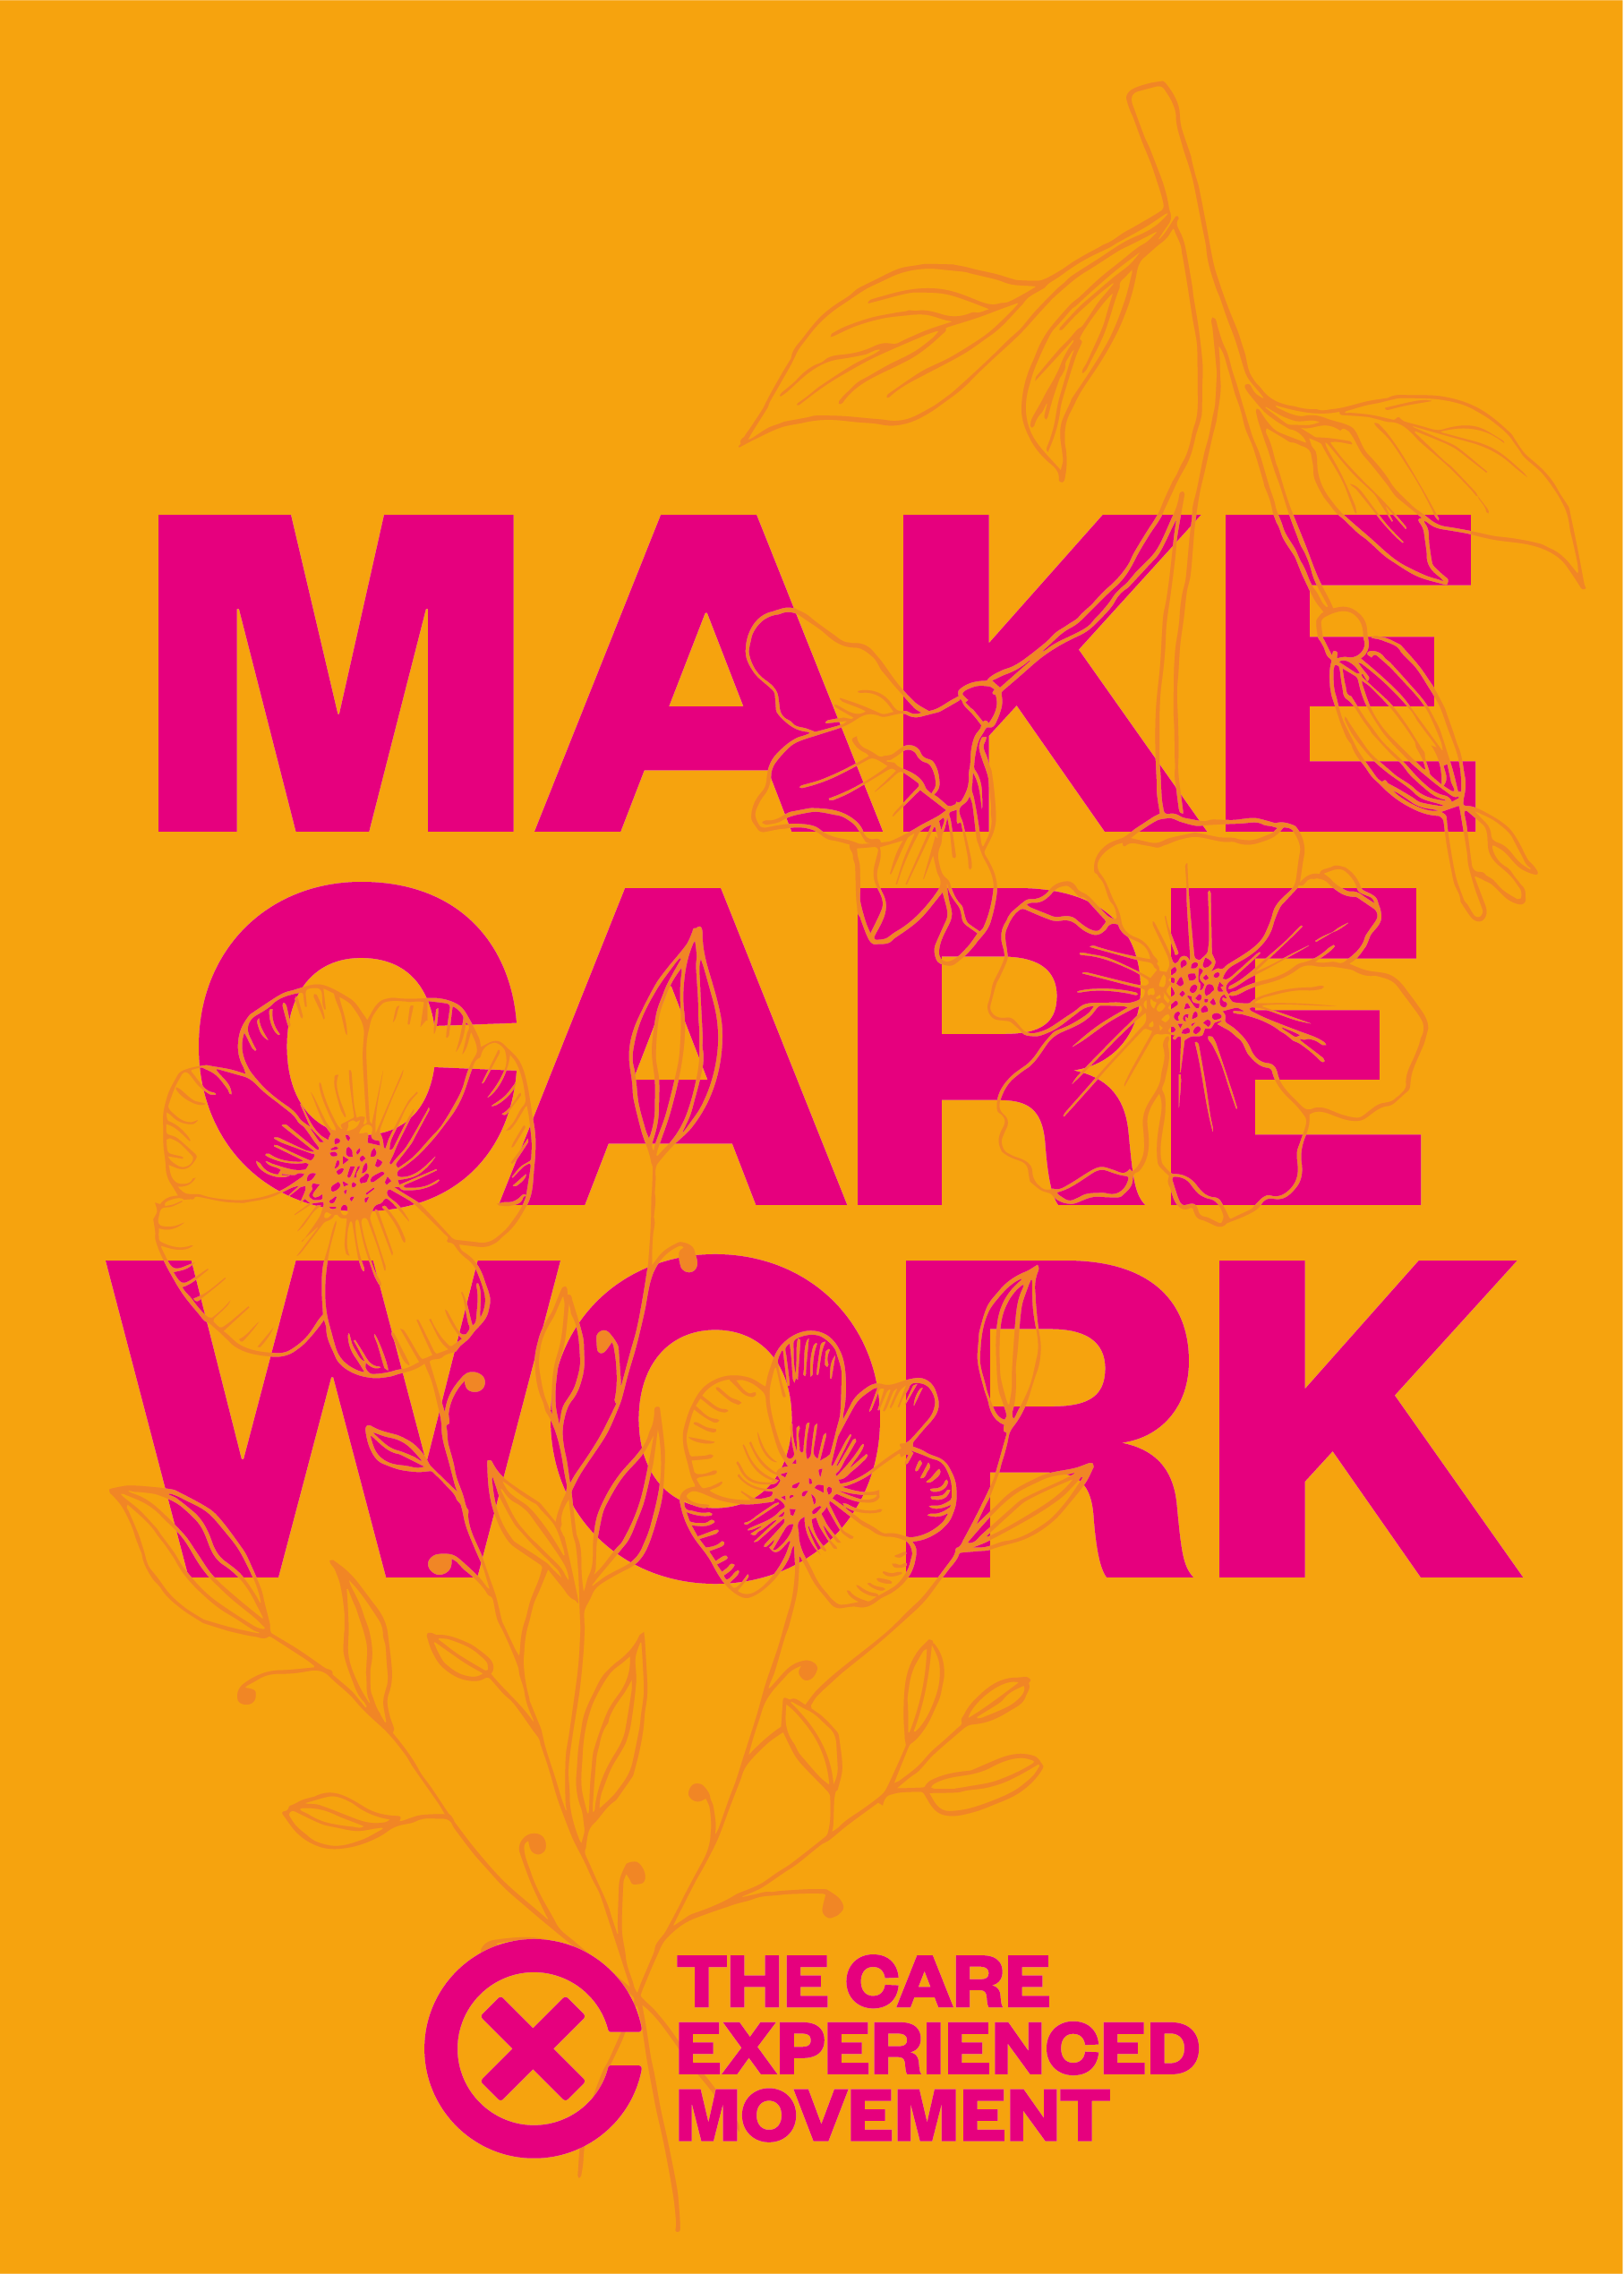 make care work poster - a yellow background with yellow hand-drawn flowers and pink text saying ‘Make care work’ and ‘The Care Experienced Movement’ and their logo of an x in a c in pink at the bottom of the poster